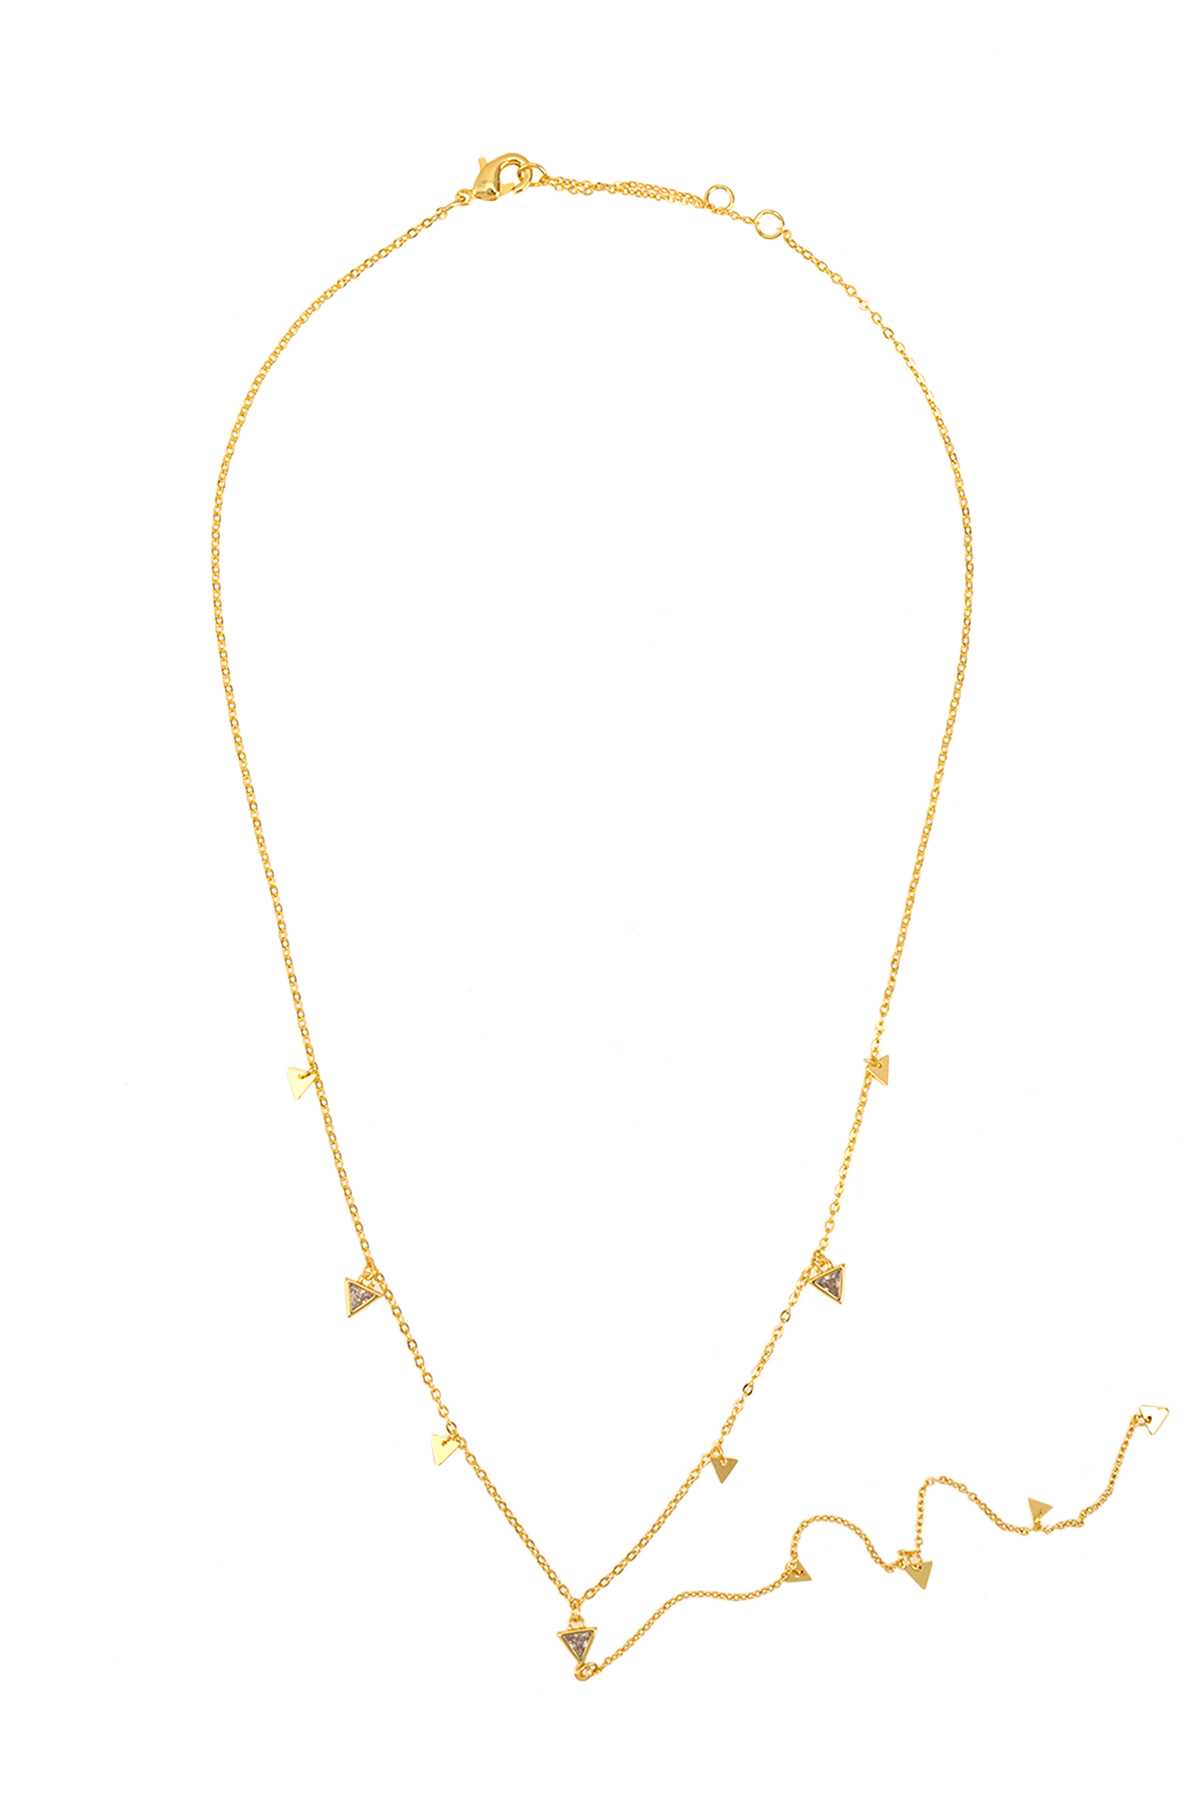 GOLD DIPPED SMALL TRIANGLE CUBIC CHARM LARIAT NECKLACE